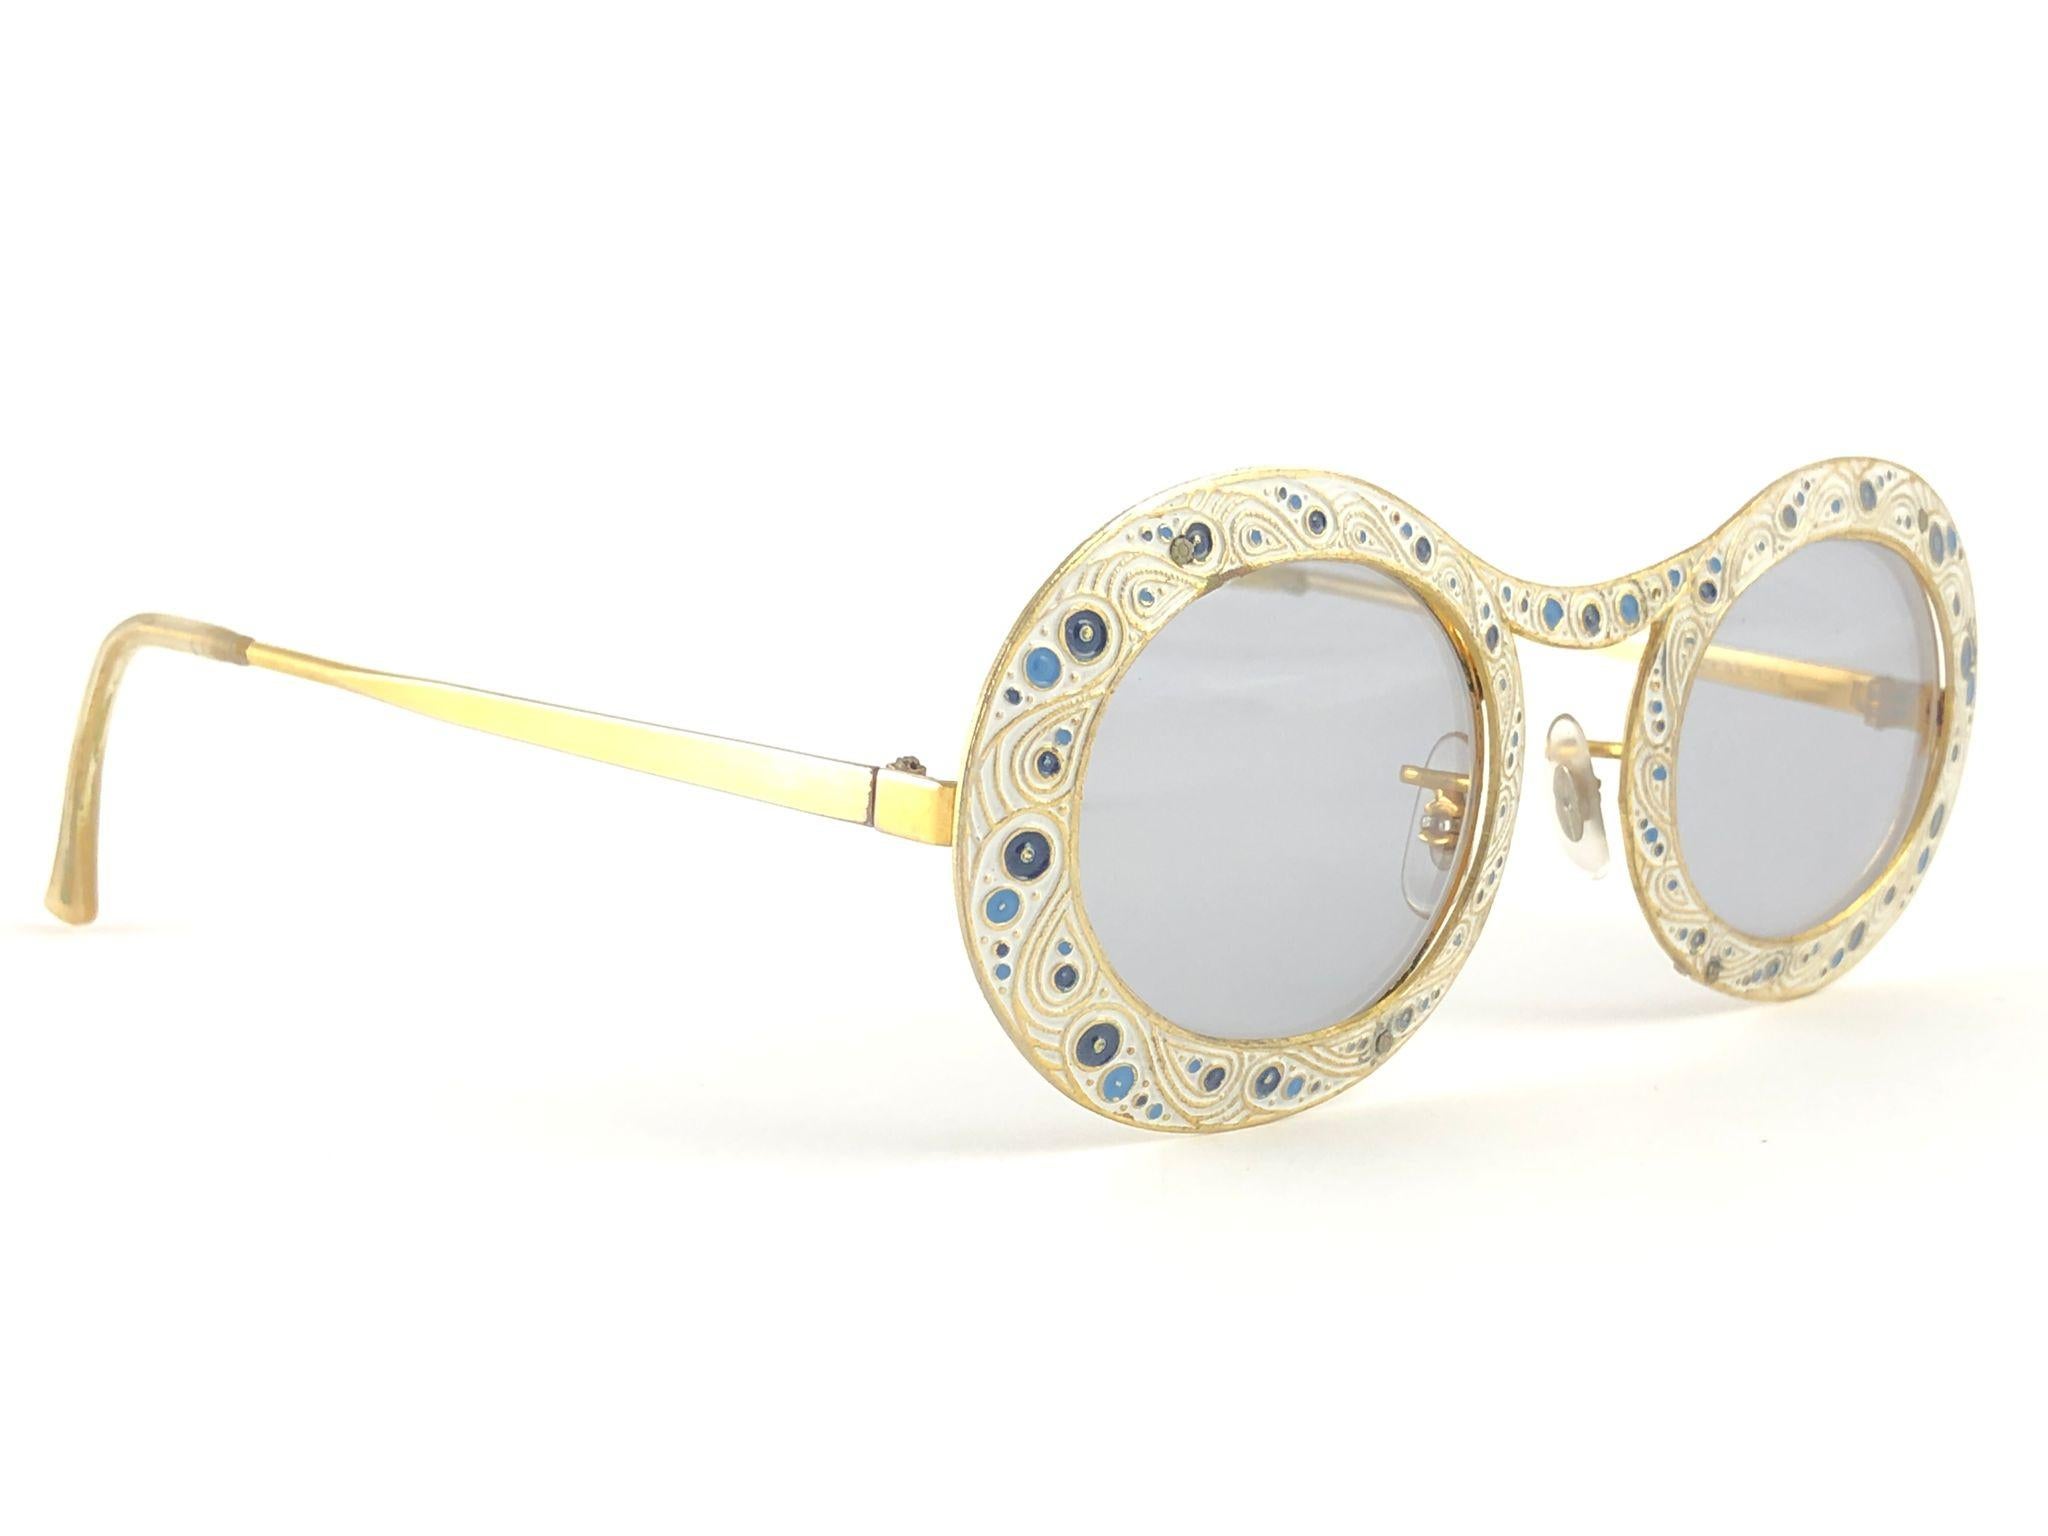 Ultra rare pair of Christian Dior Sunglasses circa 1969. 12K Gold filled frame.

This is a seldom and rare piece not only for its aesthetic value but for its importance in the sunglasses and fashion history. 

Delicate enamel ornamented plated